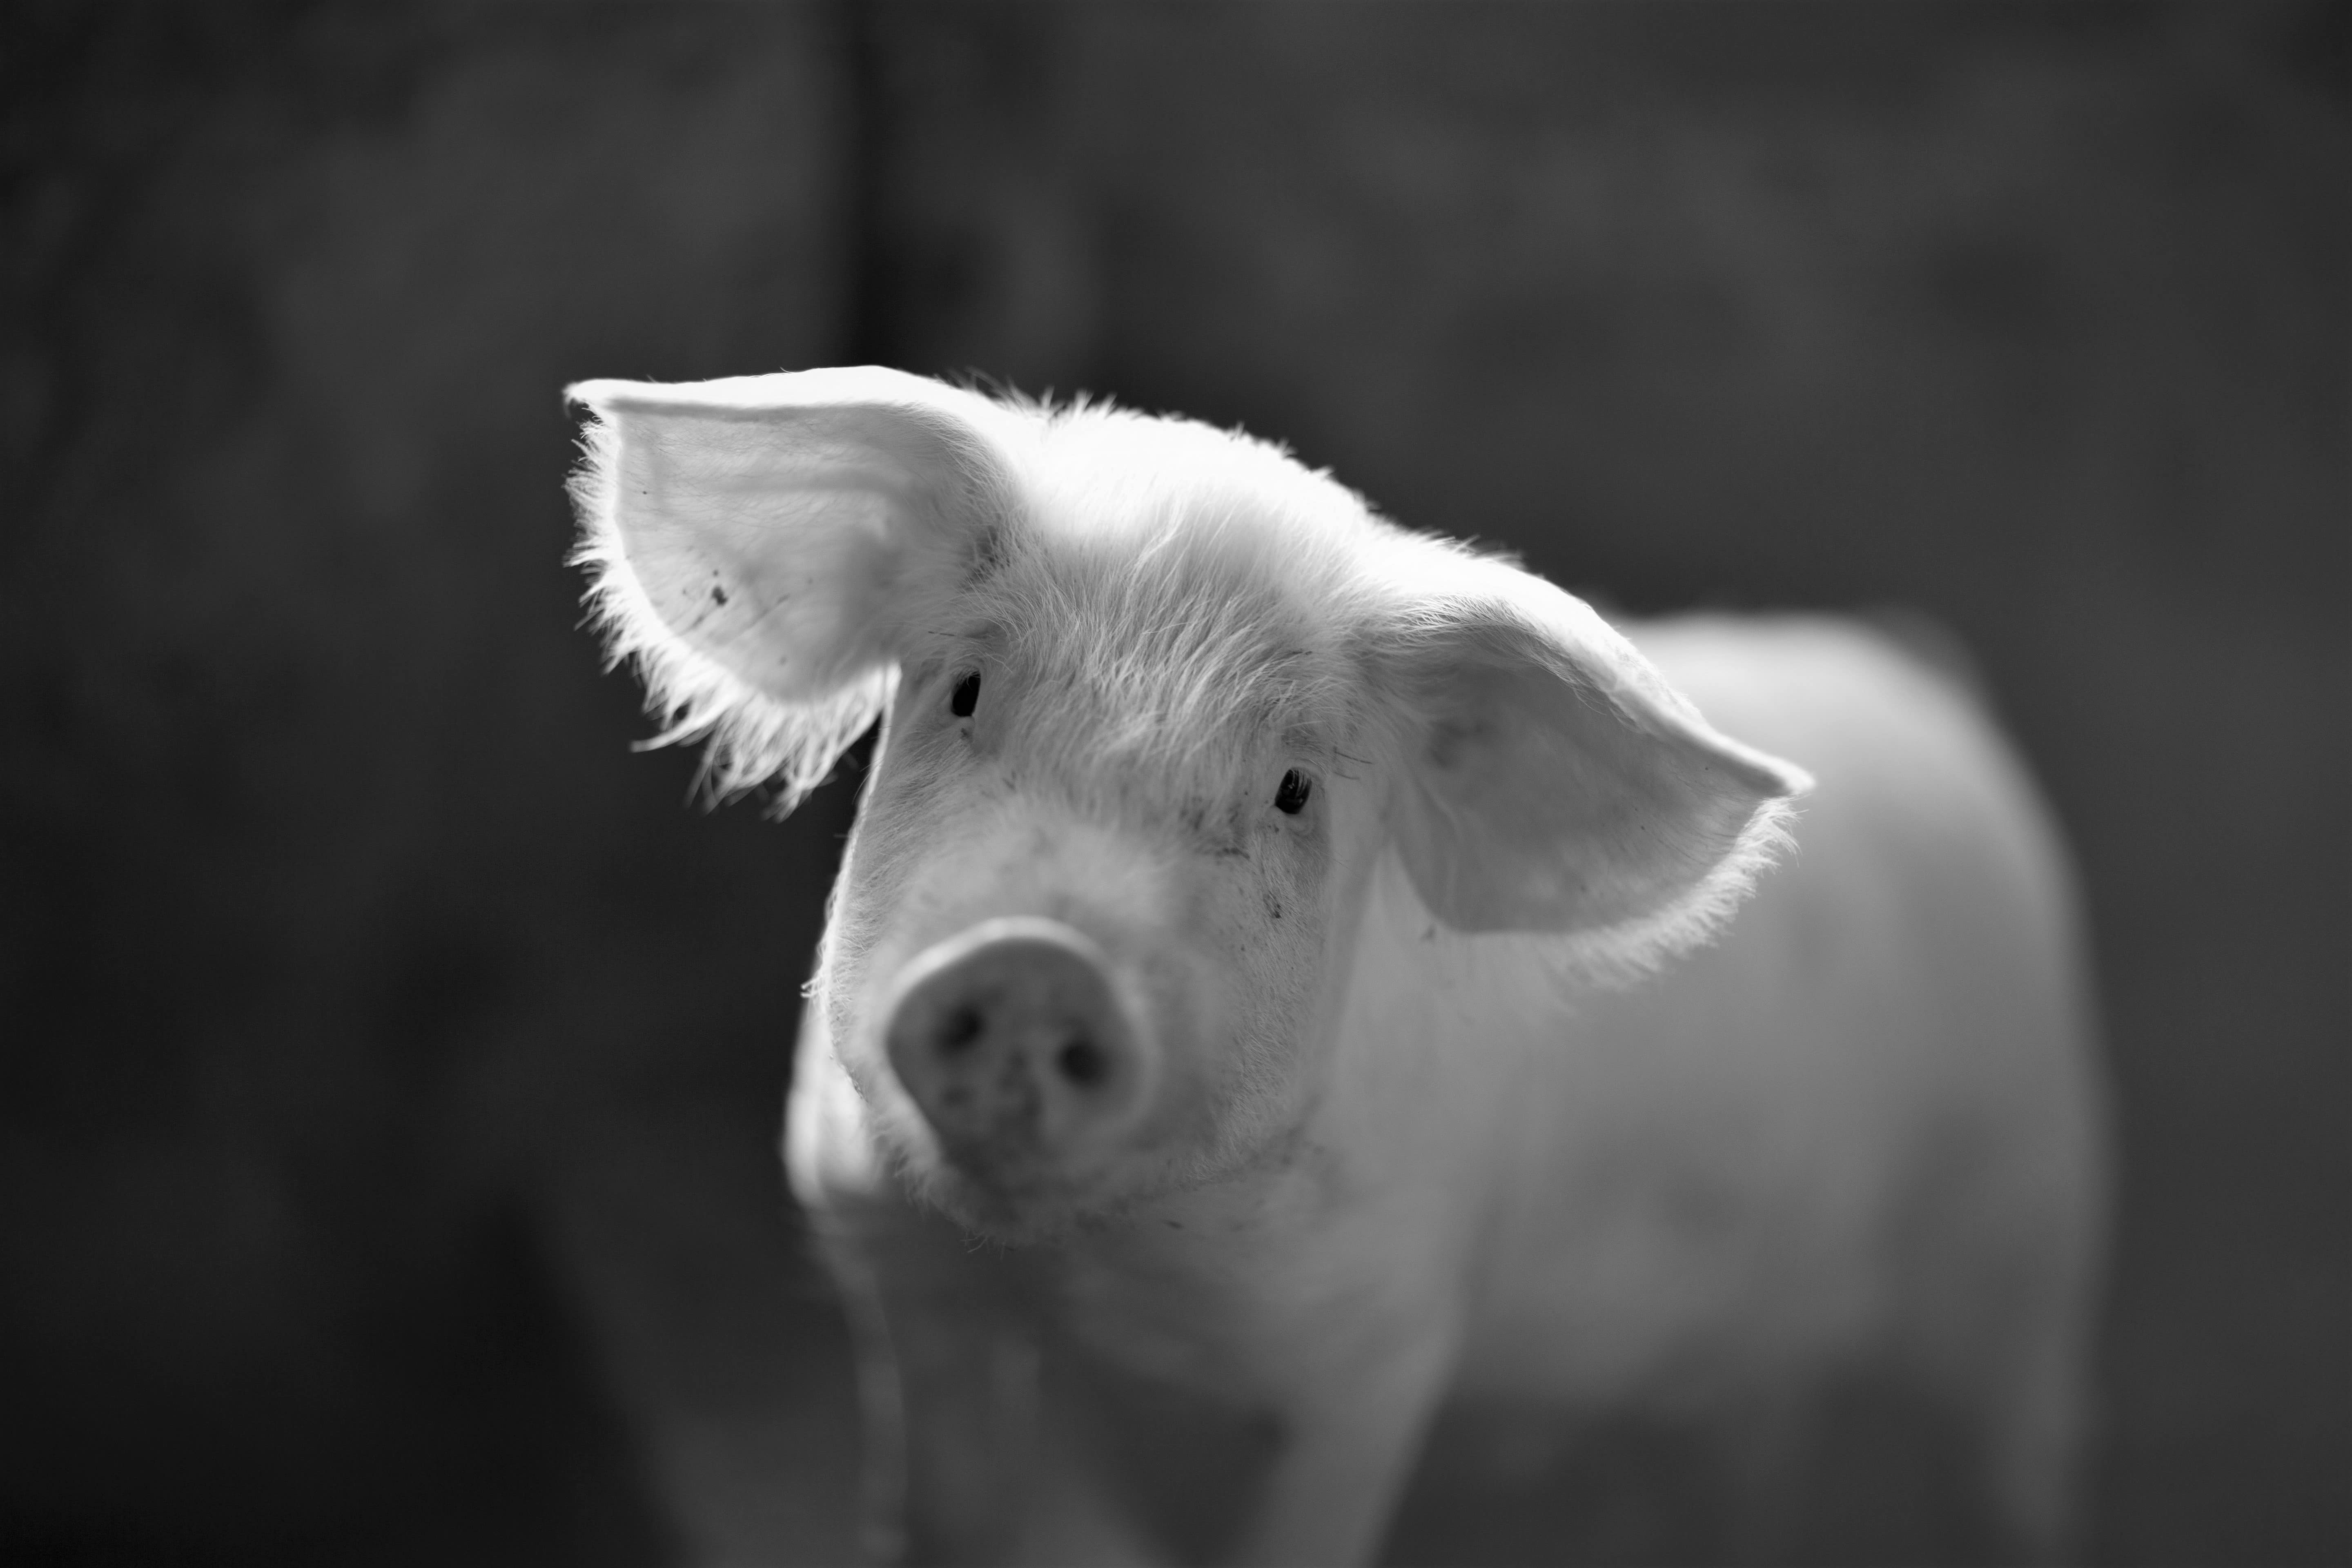 Stock image - chinese reis horoscoop - Piglet / Pig - Photo by Julian Dutton on Unsplash